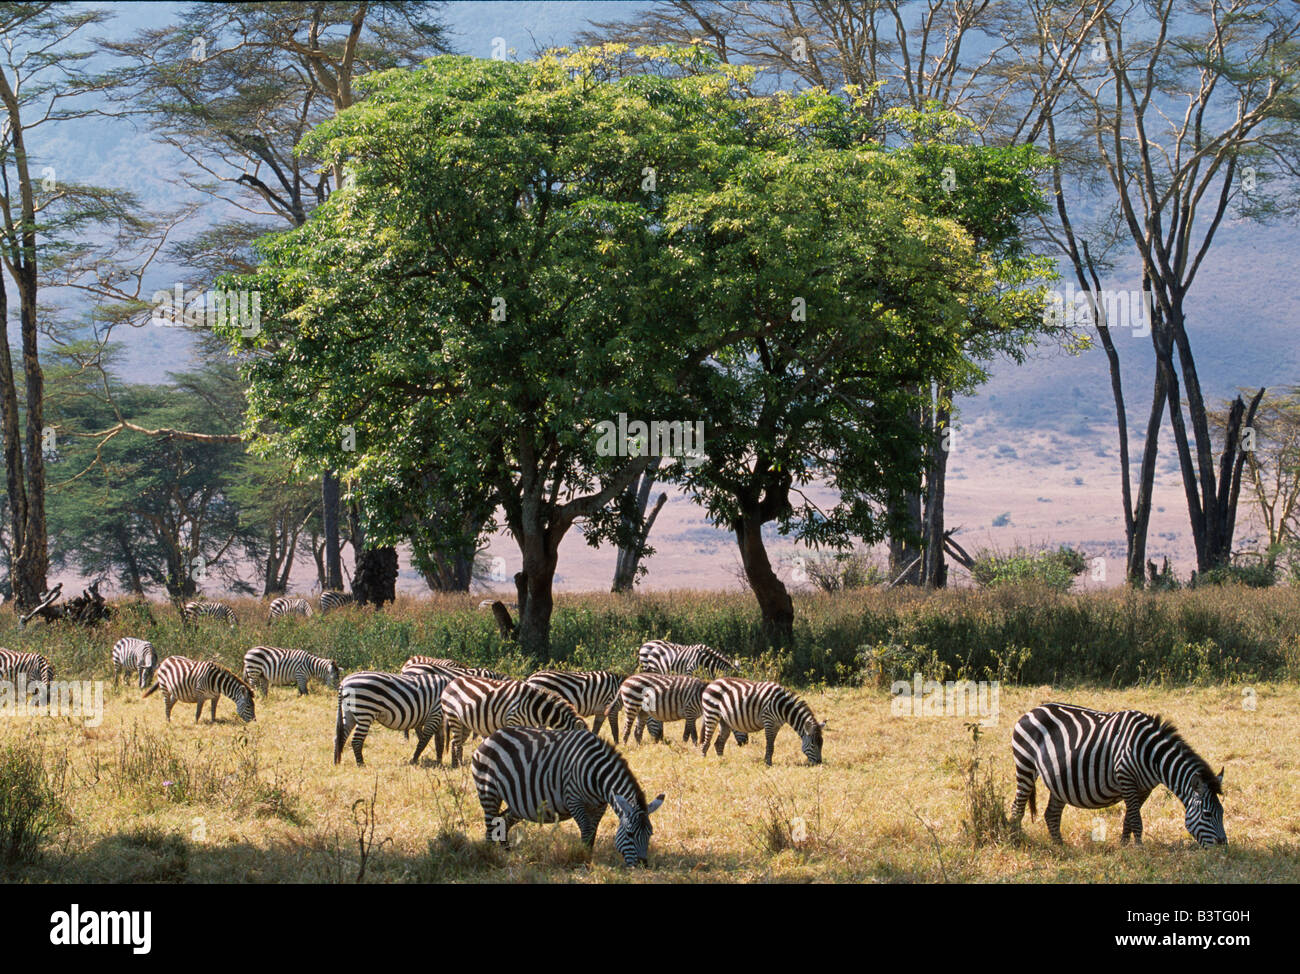 Tanzania, Ngorongoro Crater. Common zebra browse on grass in Lerai Forest on the crater floor with Fever trees and Quinine Trees behind Stock Photo